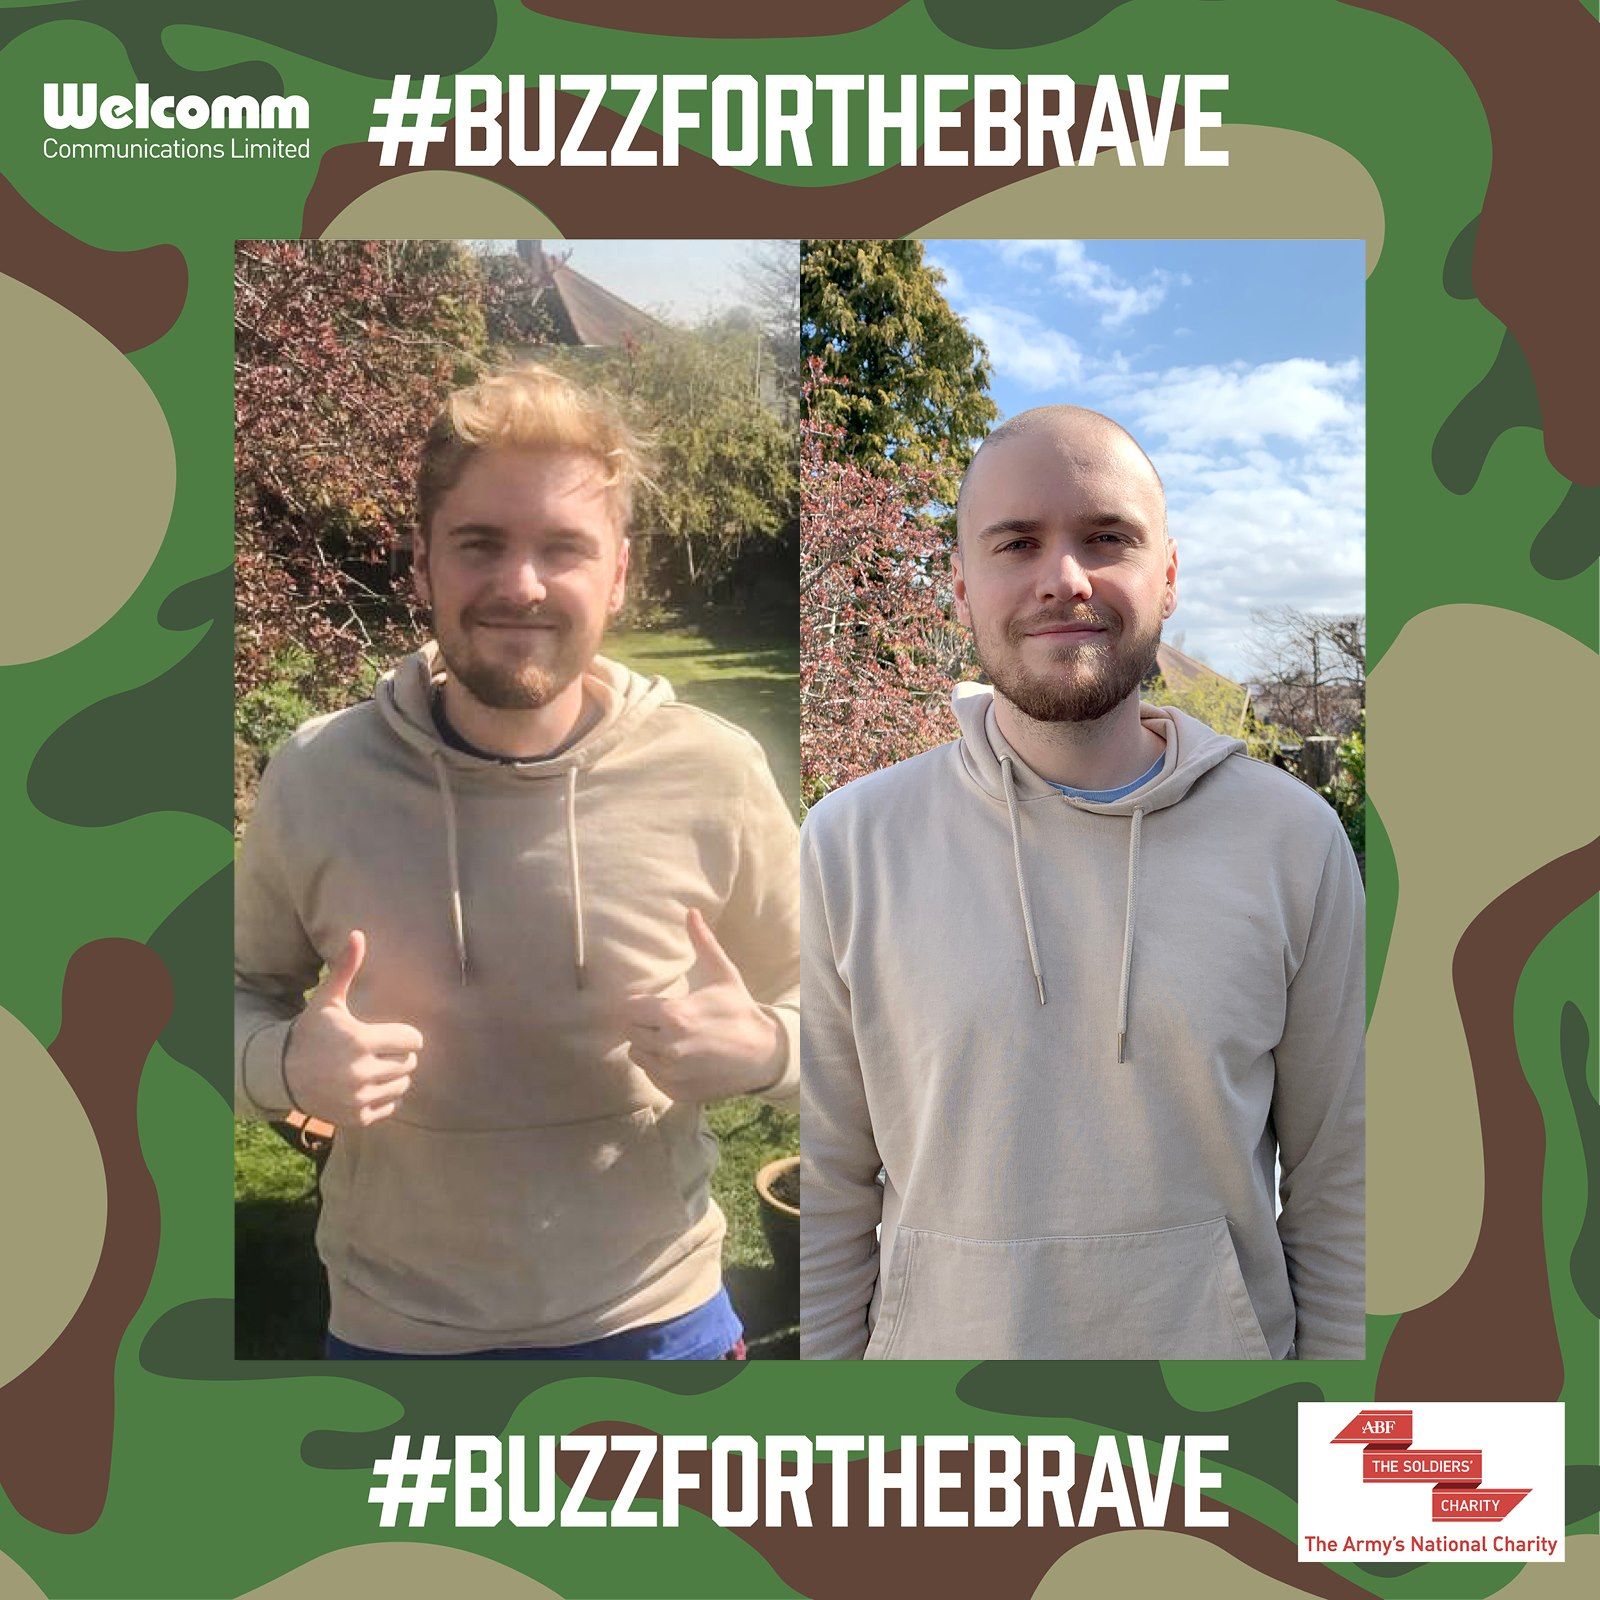 Buzz for the brave, Welcomm Communications fundraising for ABF The Soldiers' Charity